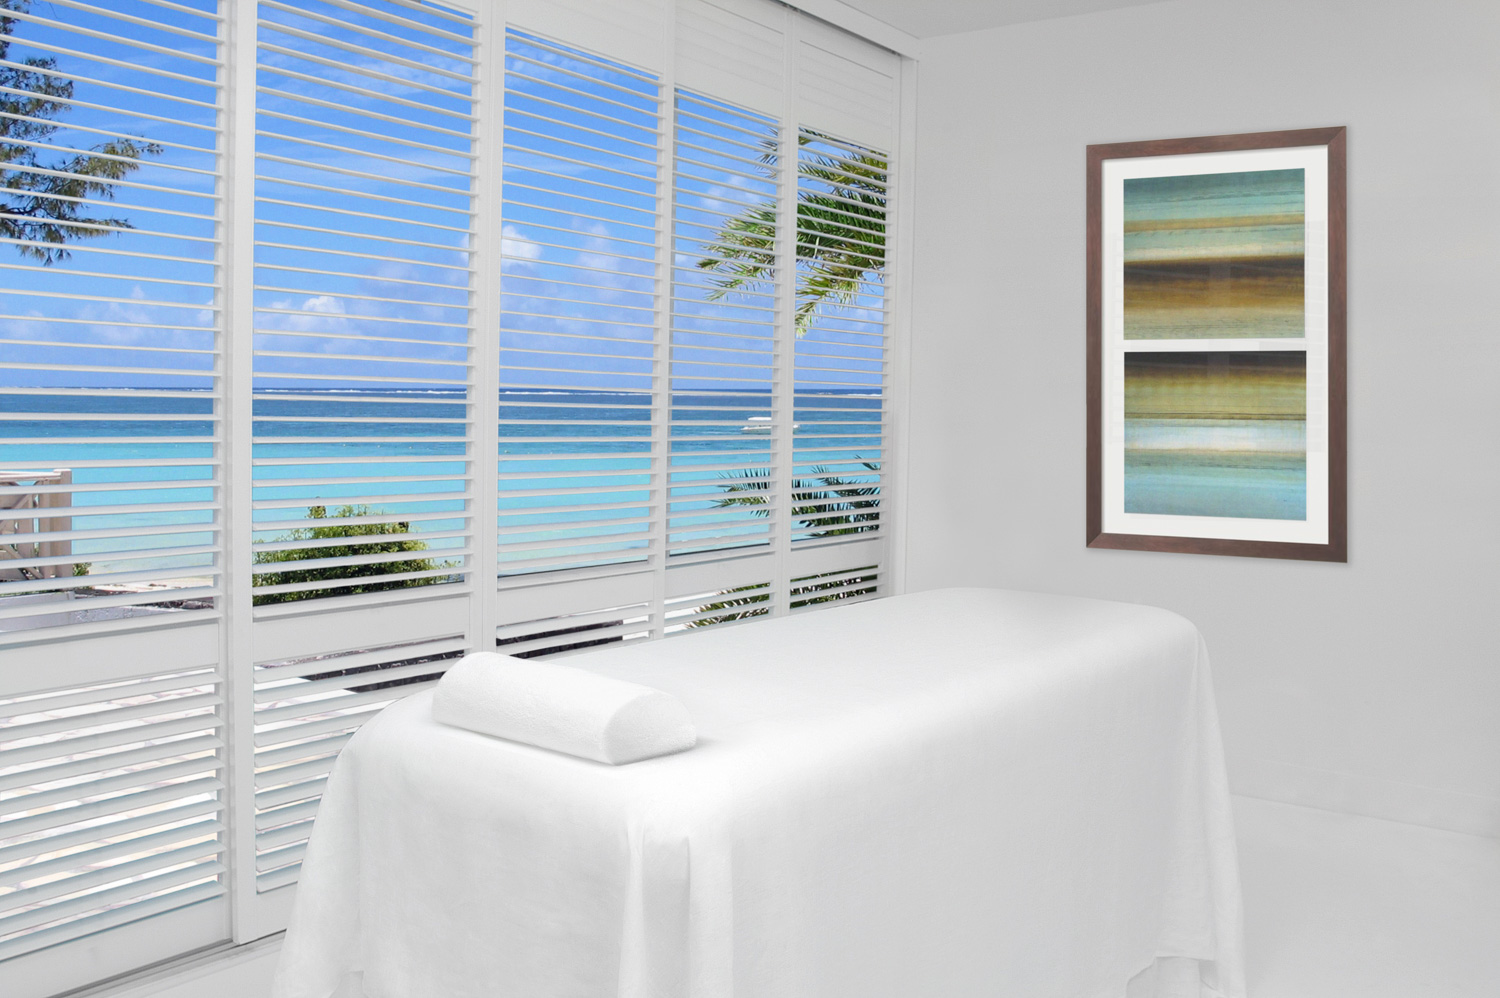 Tranquil massage room with ocean view, enhanced by composite shutters for privacy and ambiance.